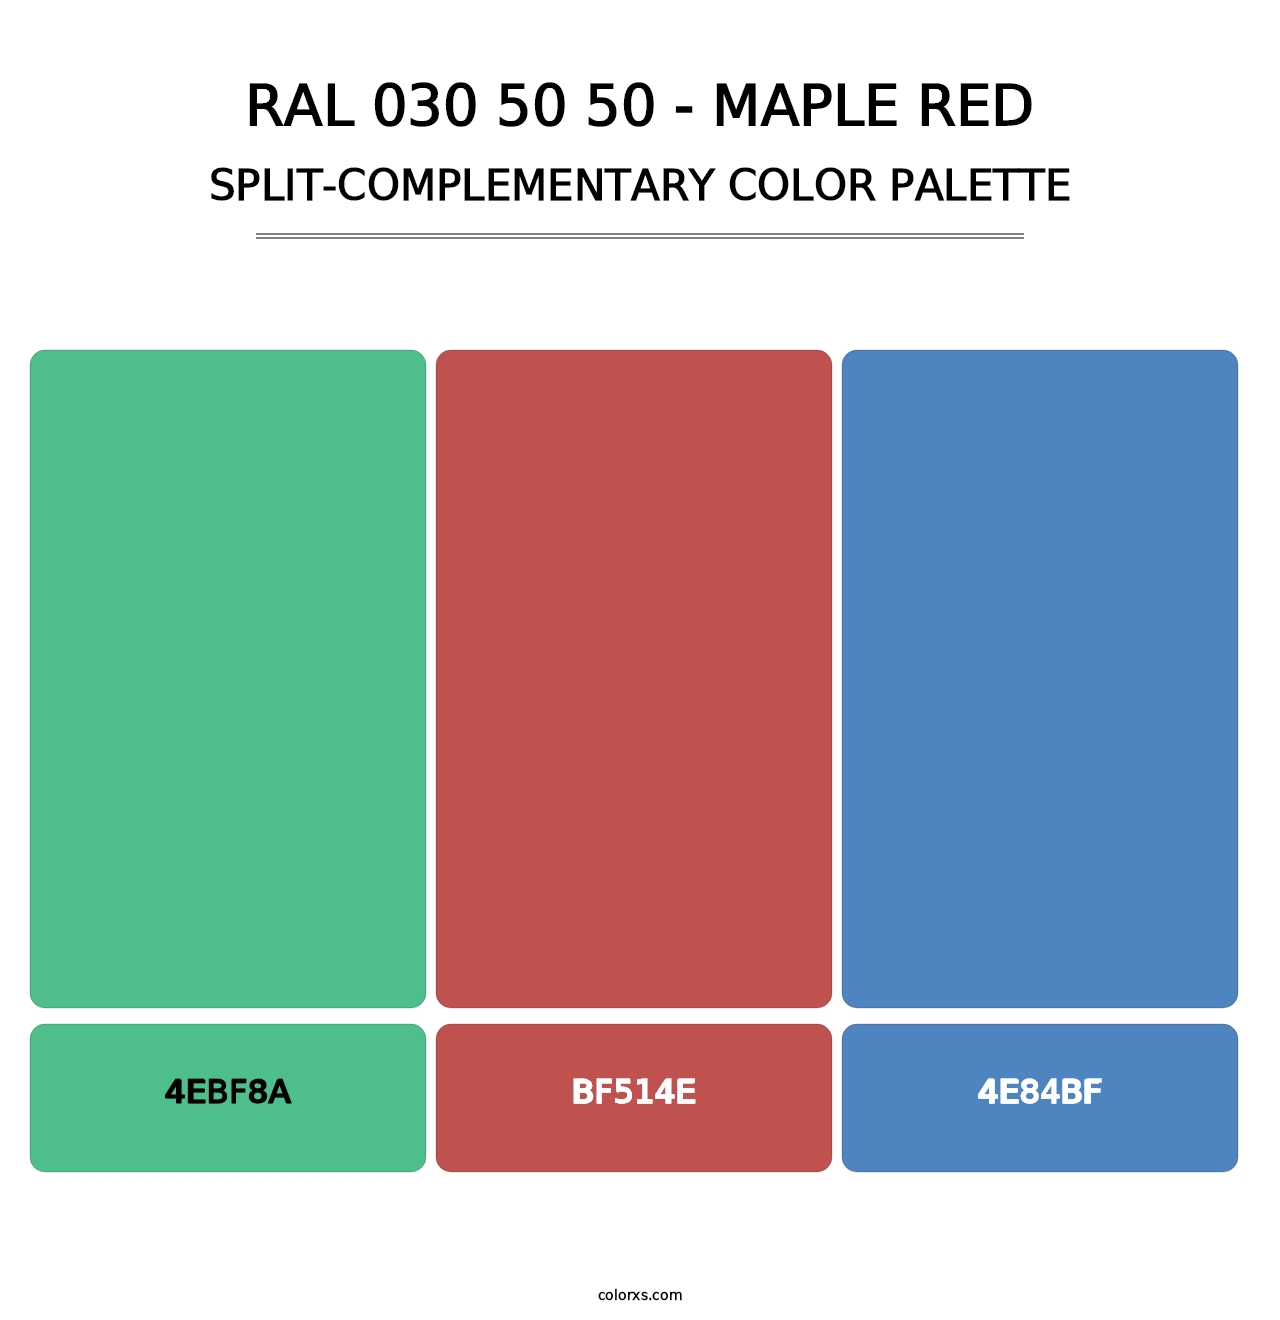 RAL 030 50 50 - Maple Red - Split-Complementary Color Palette